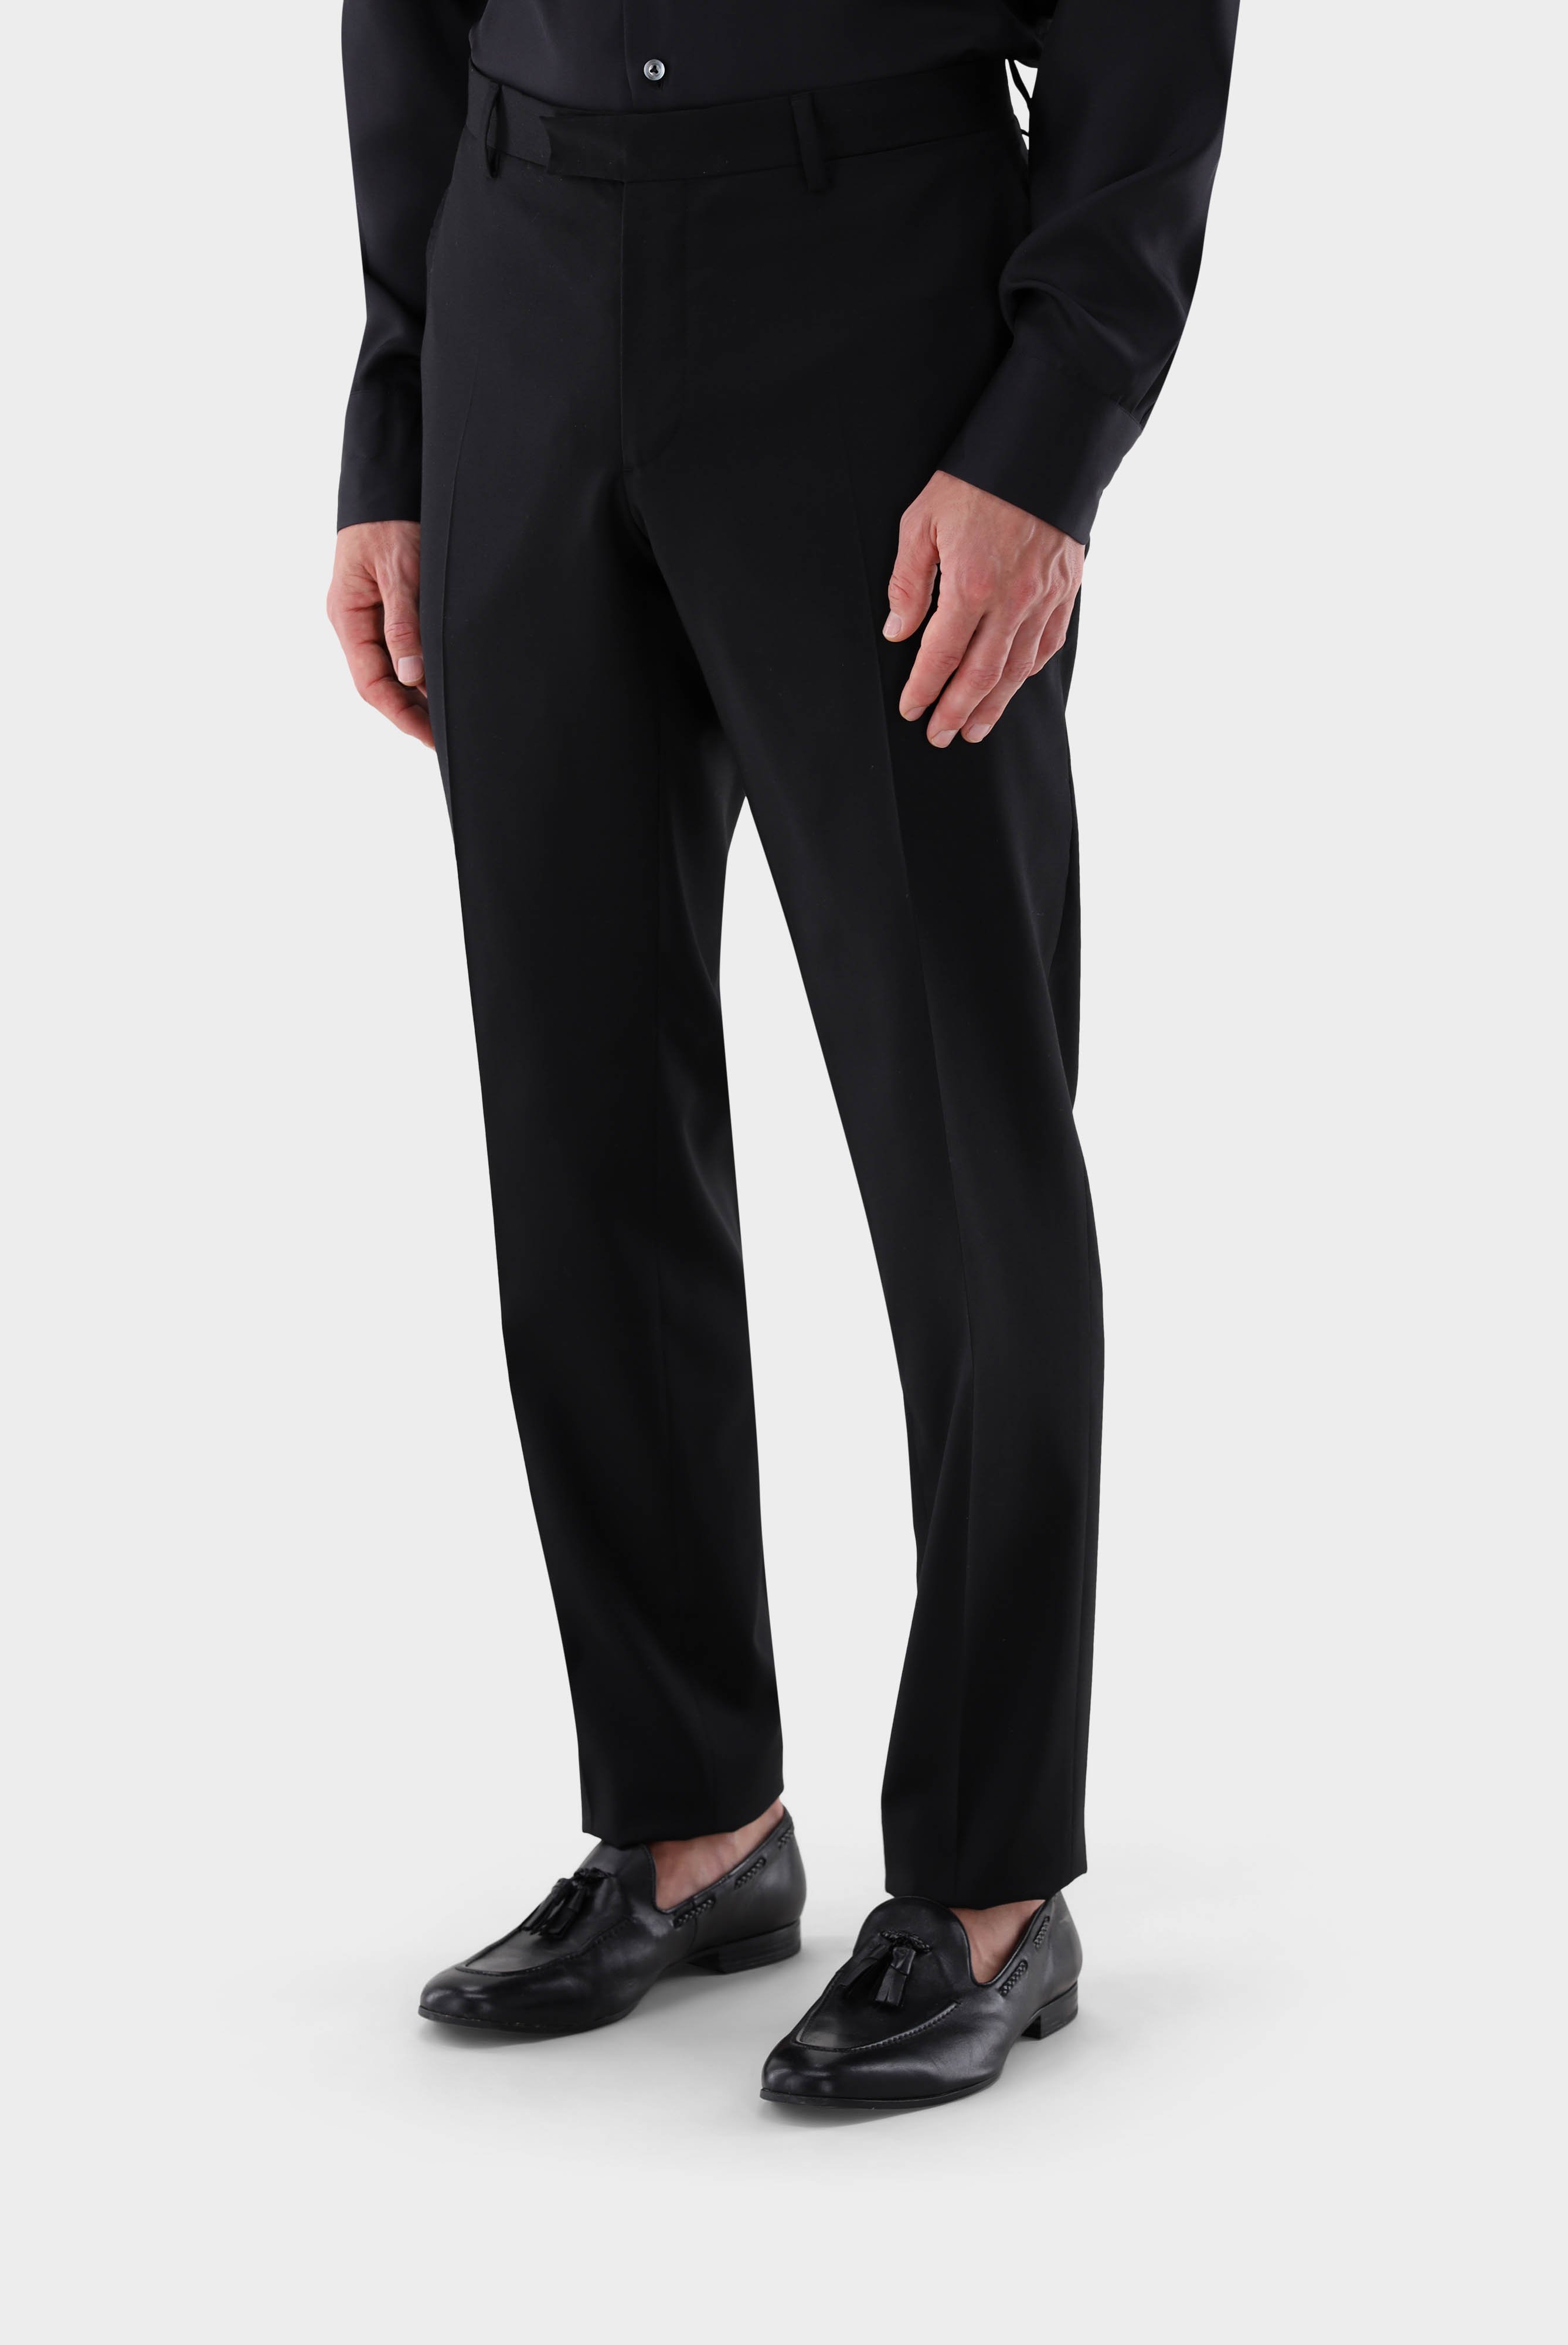 Jeans & Trousers+Wool Trousers Slim Fit+20.7880.16.H01010.099.50